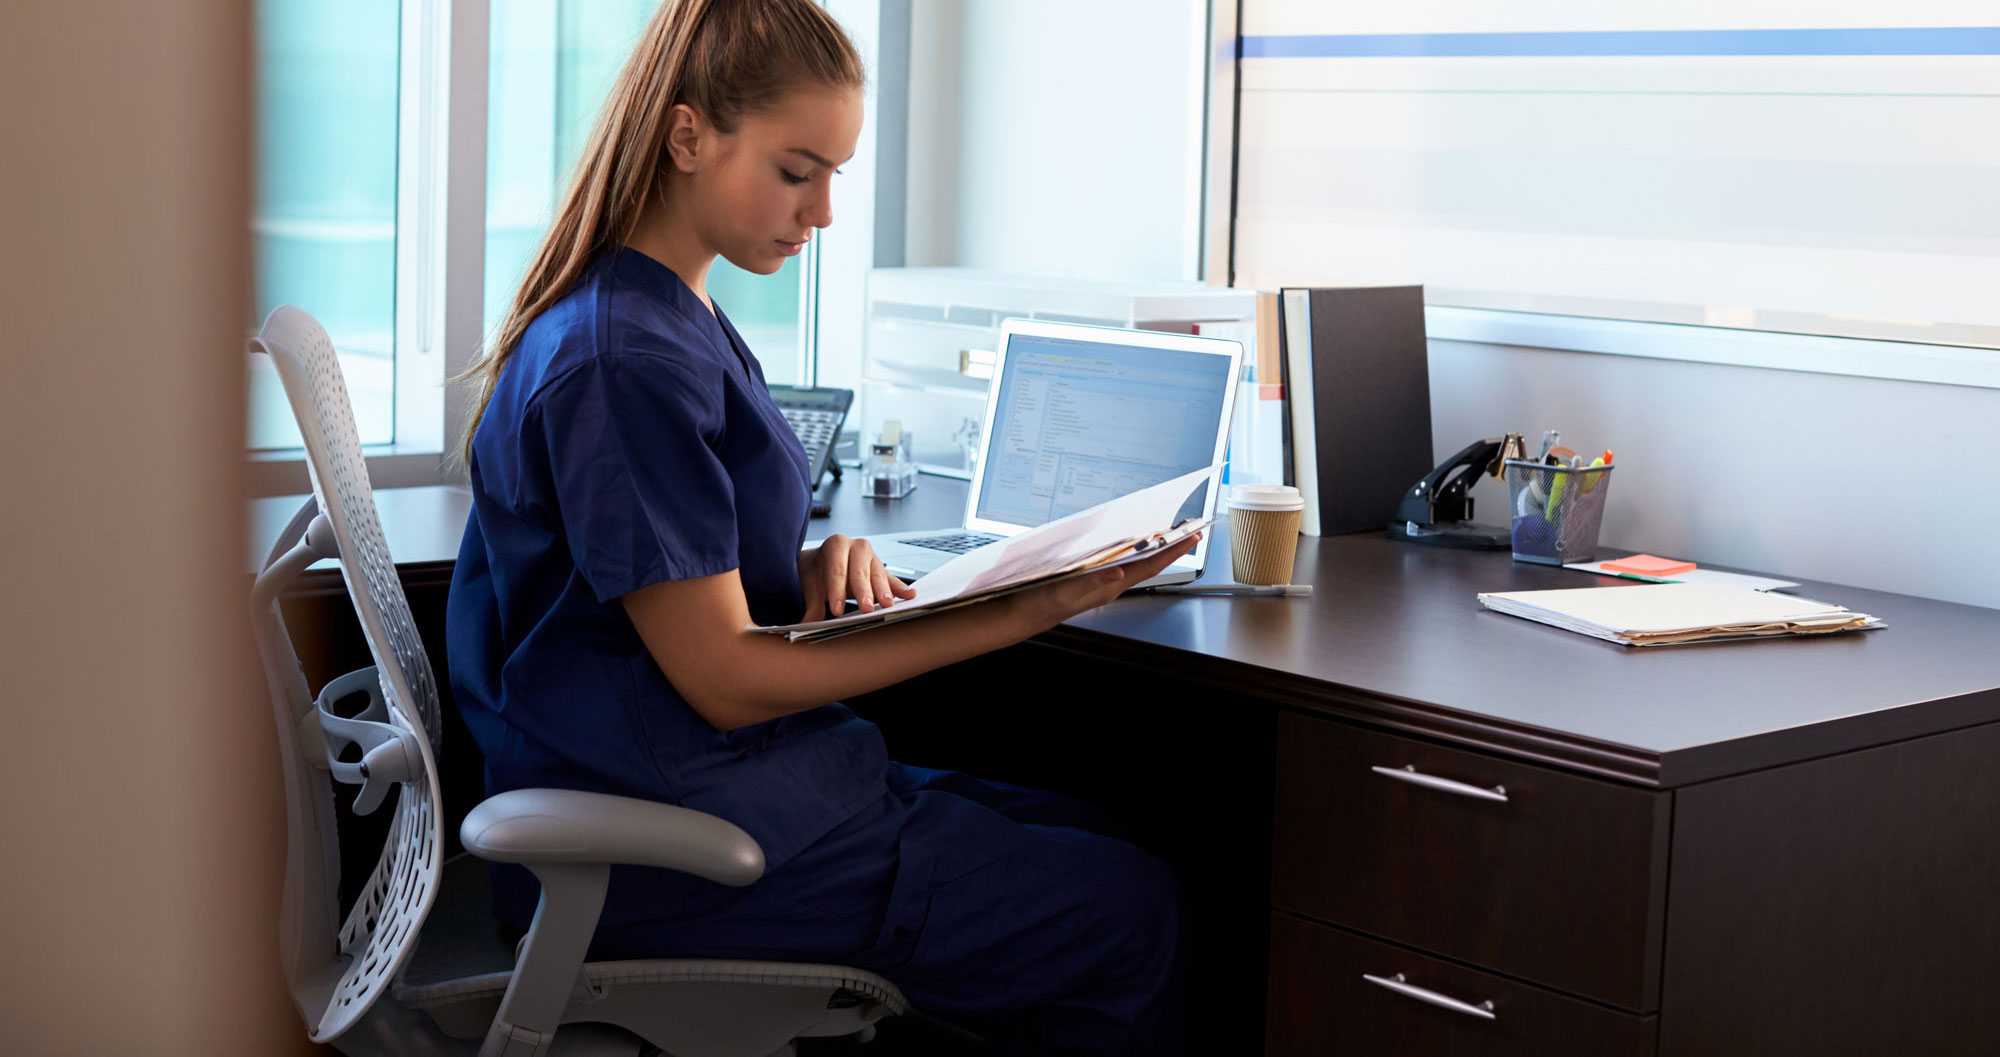 Medical Office Administration Image - Larock Healthcare Academy